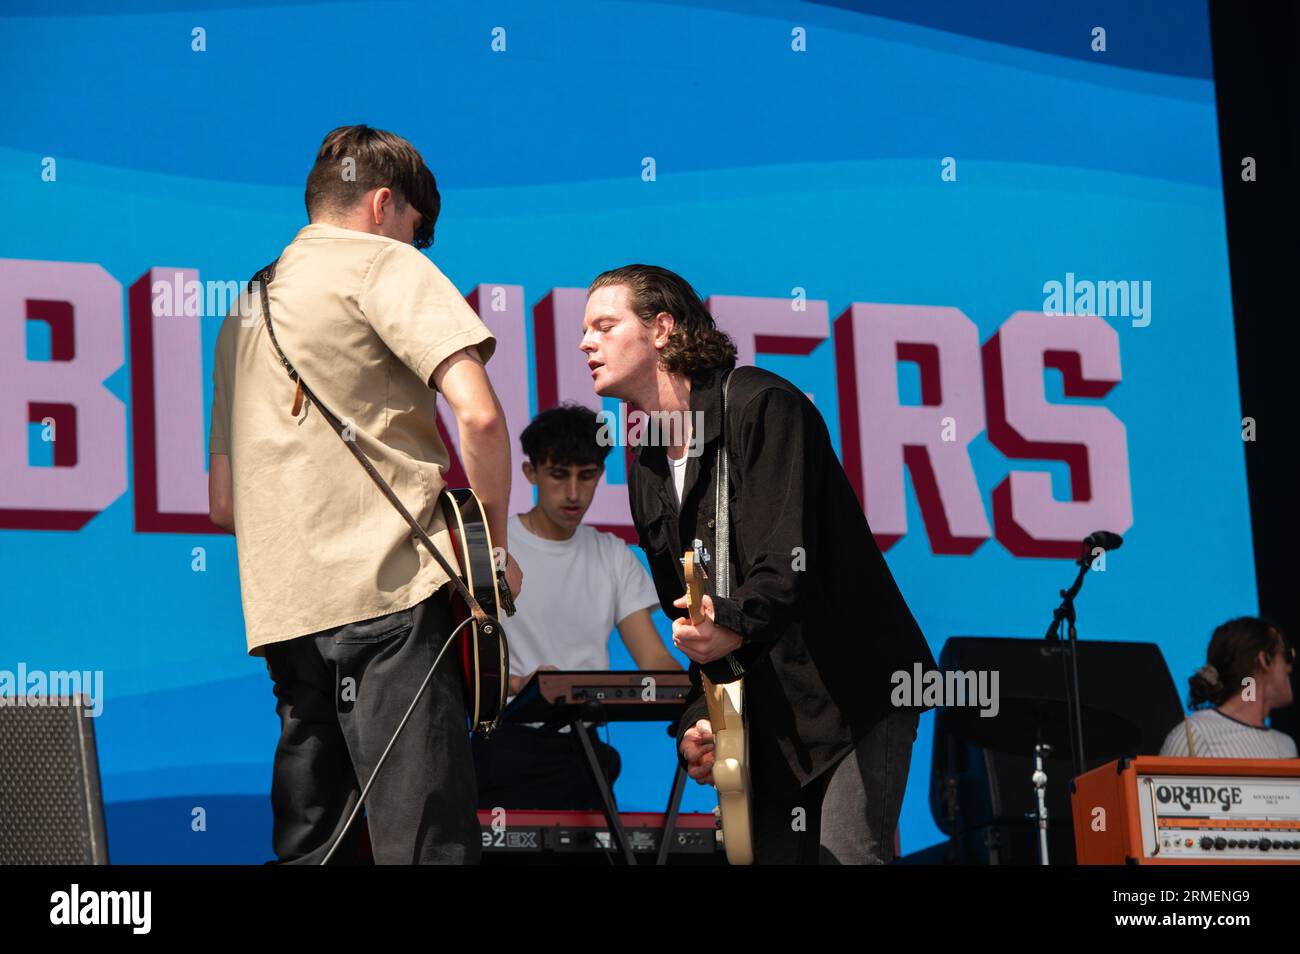 Portsmouth, United Kingdom. 27th August 2023. The Blinders perform live at Victorious Festival 2023. Cristina Massei/Alamy LIve News Stock Photo